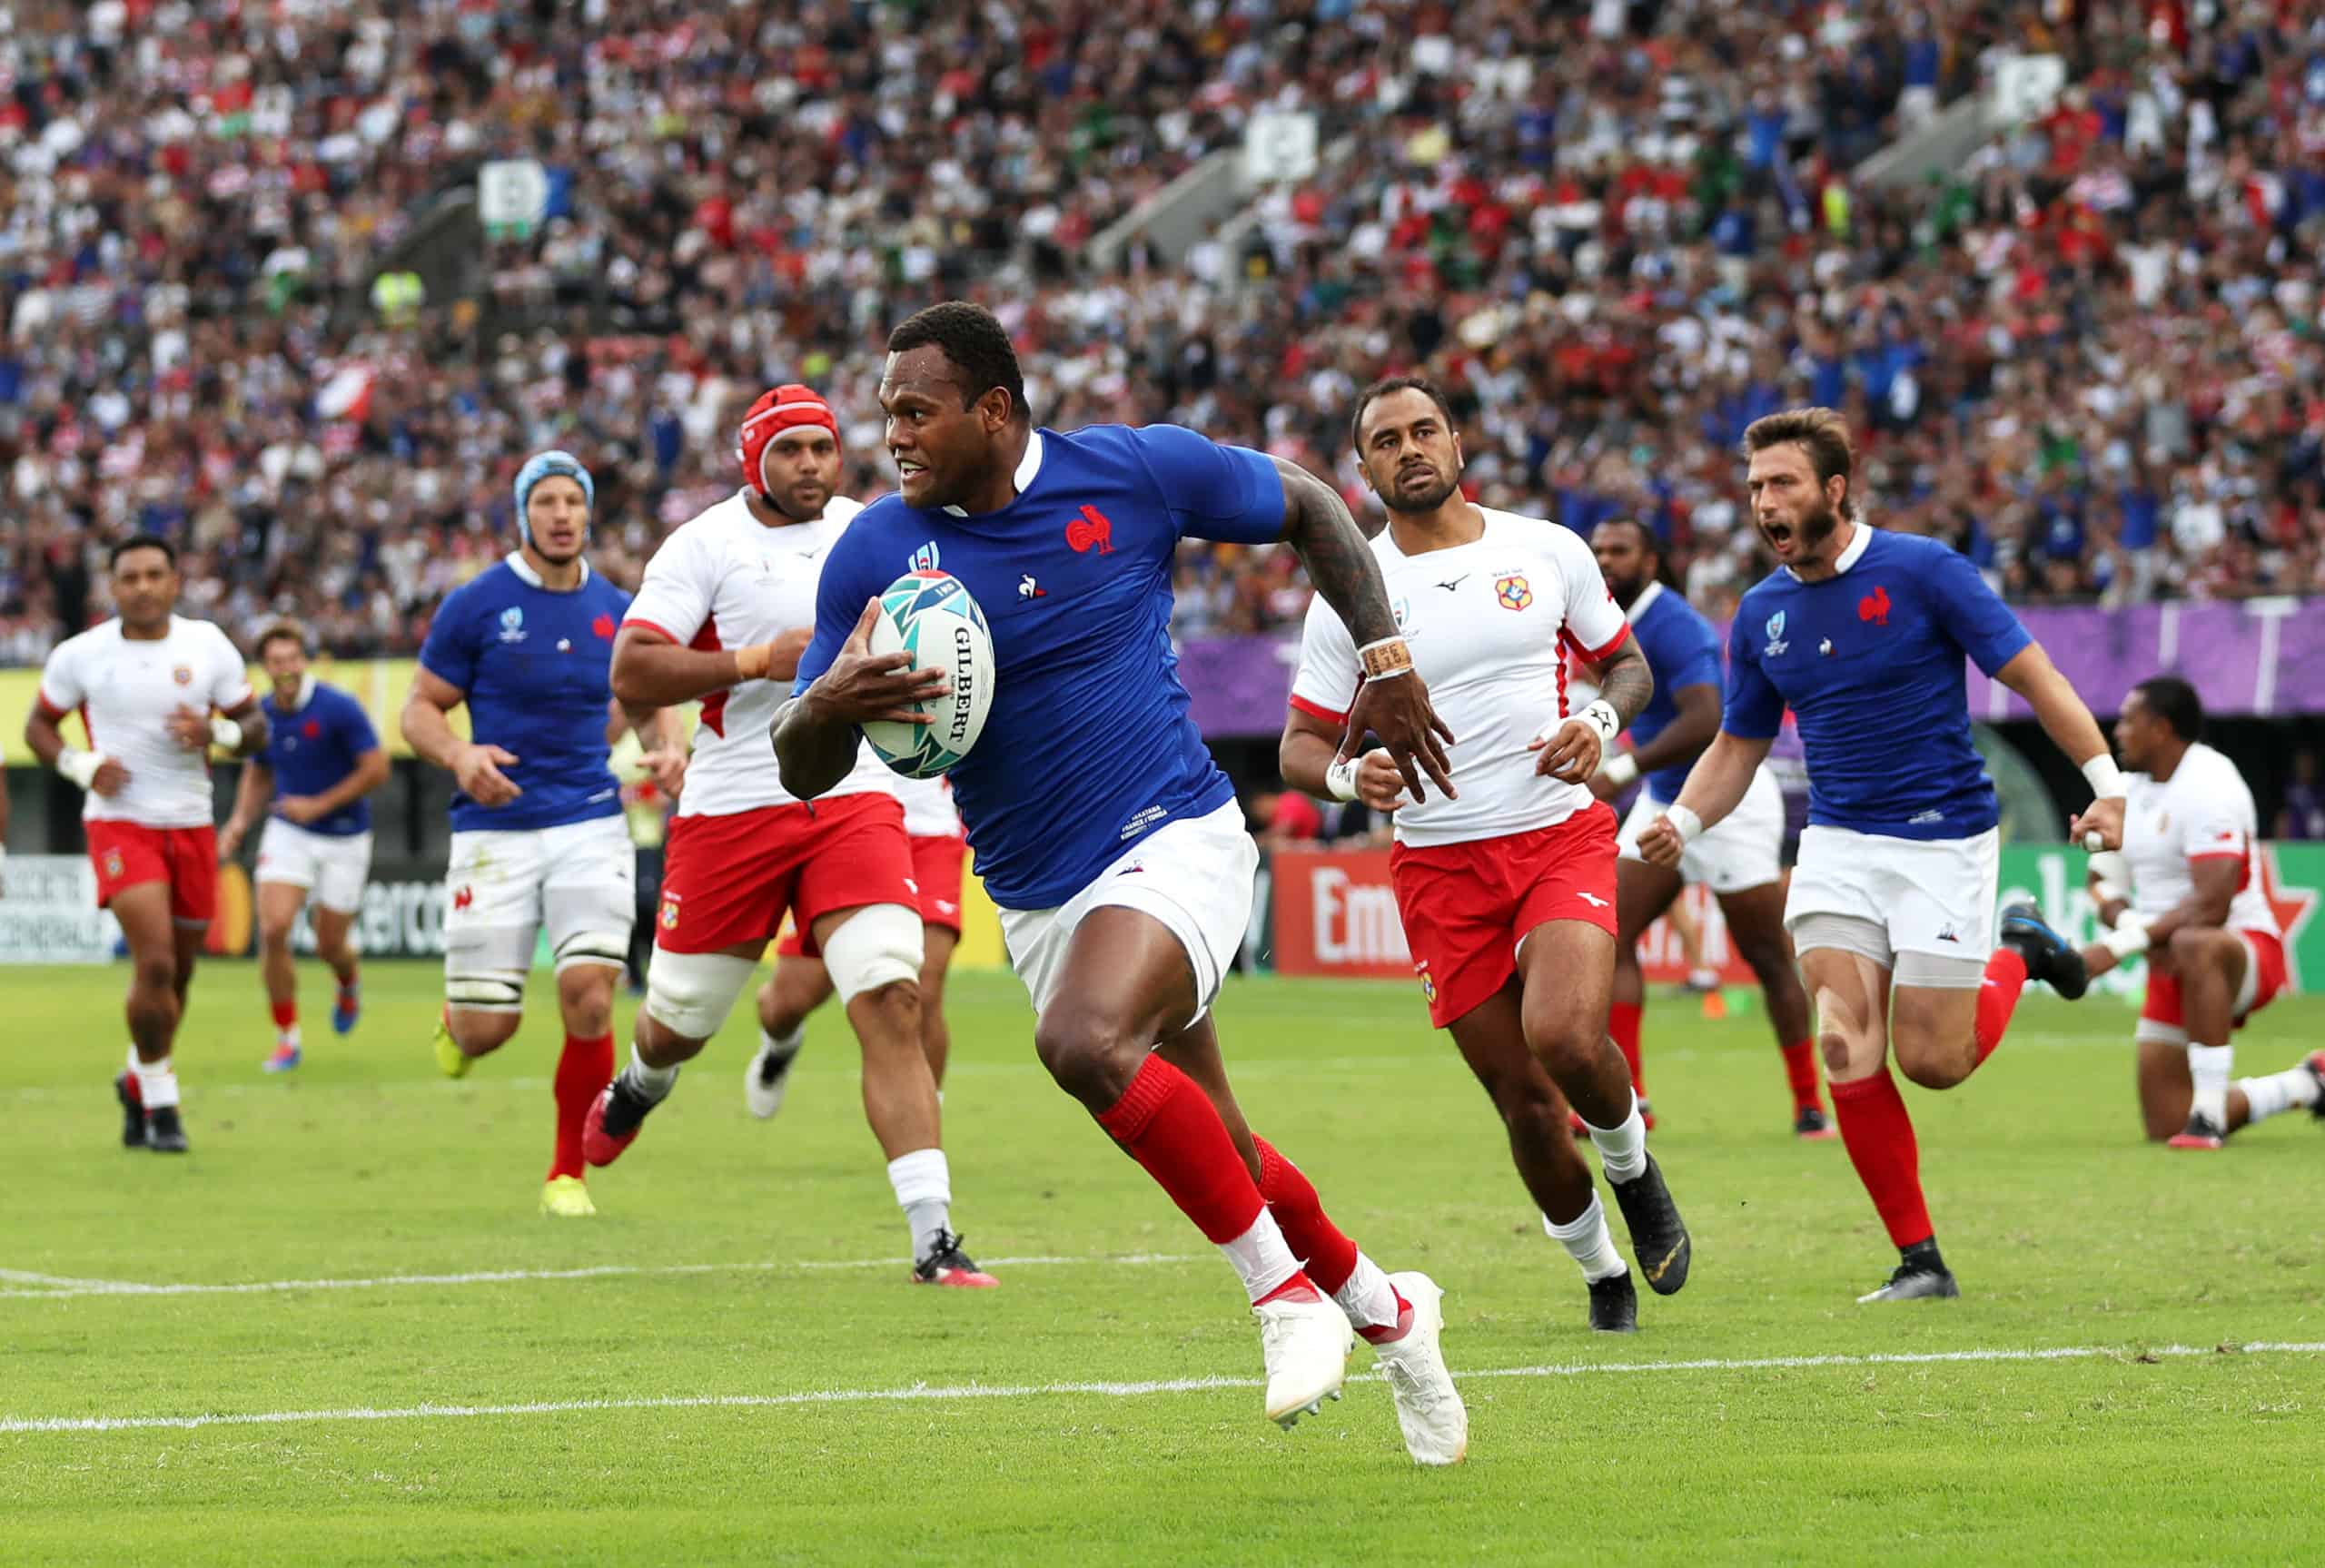 Rugby World Cup France – Will the hosts go all the way?